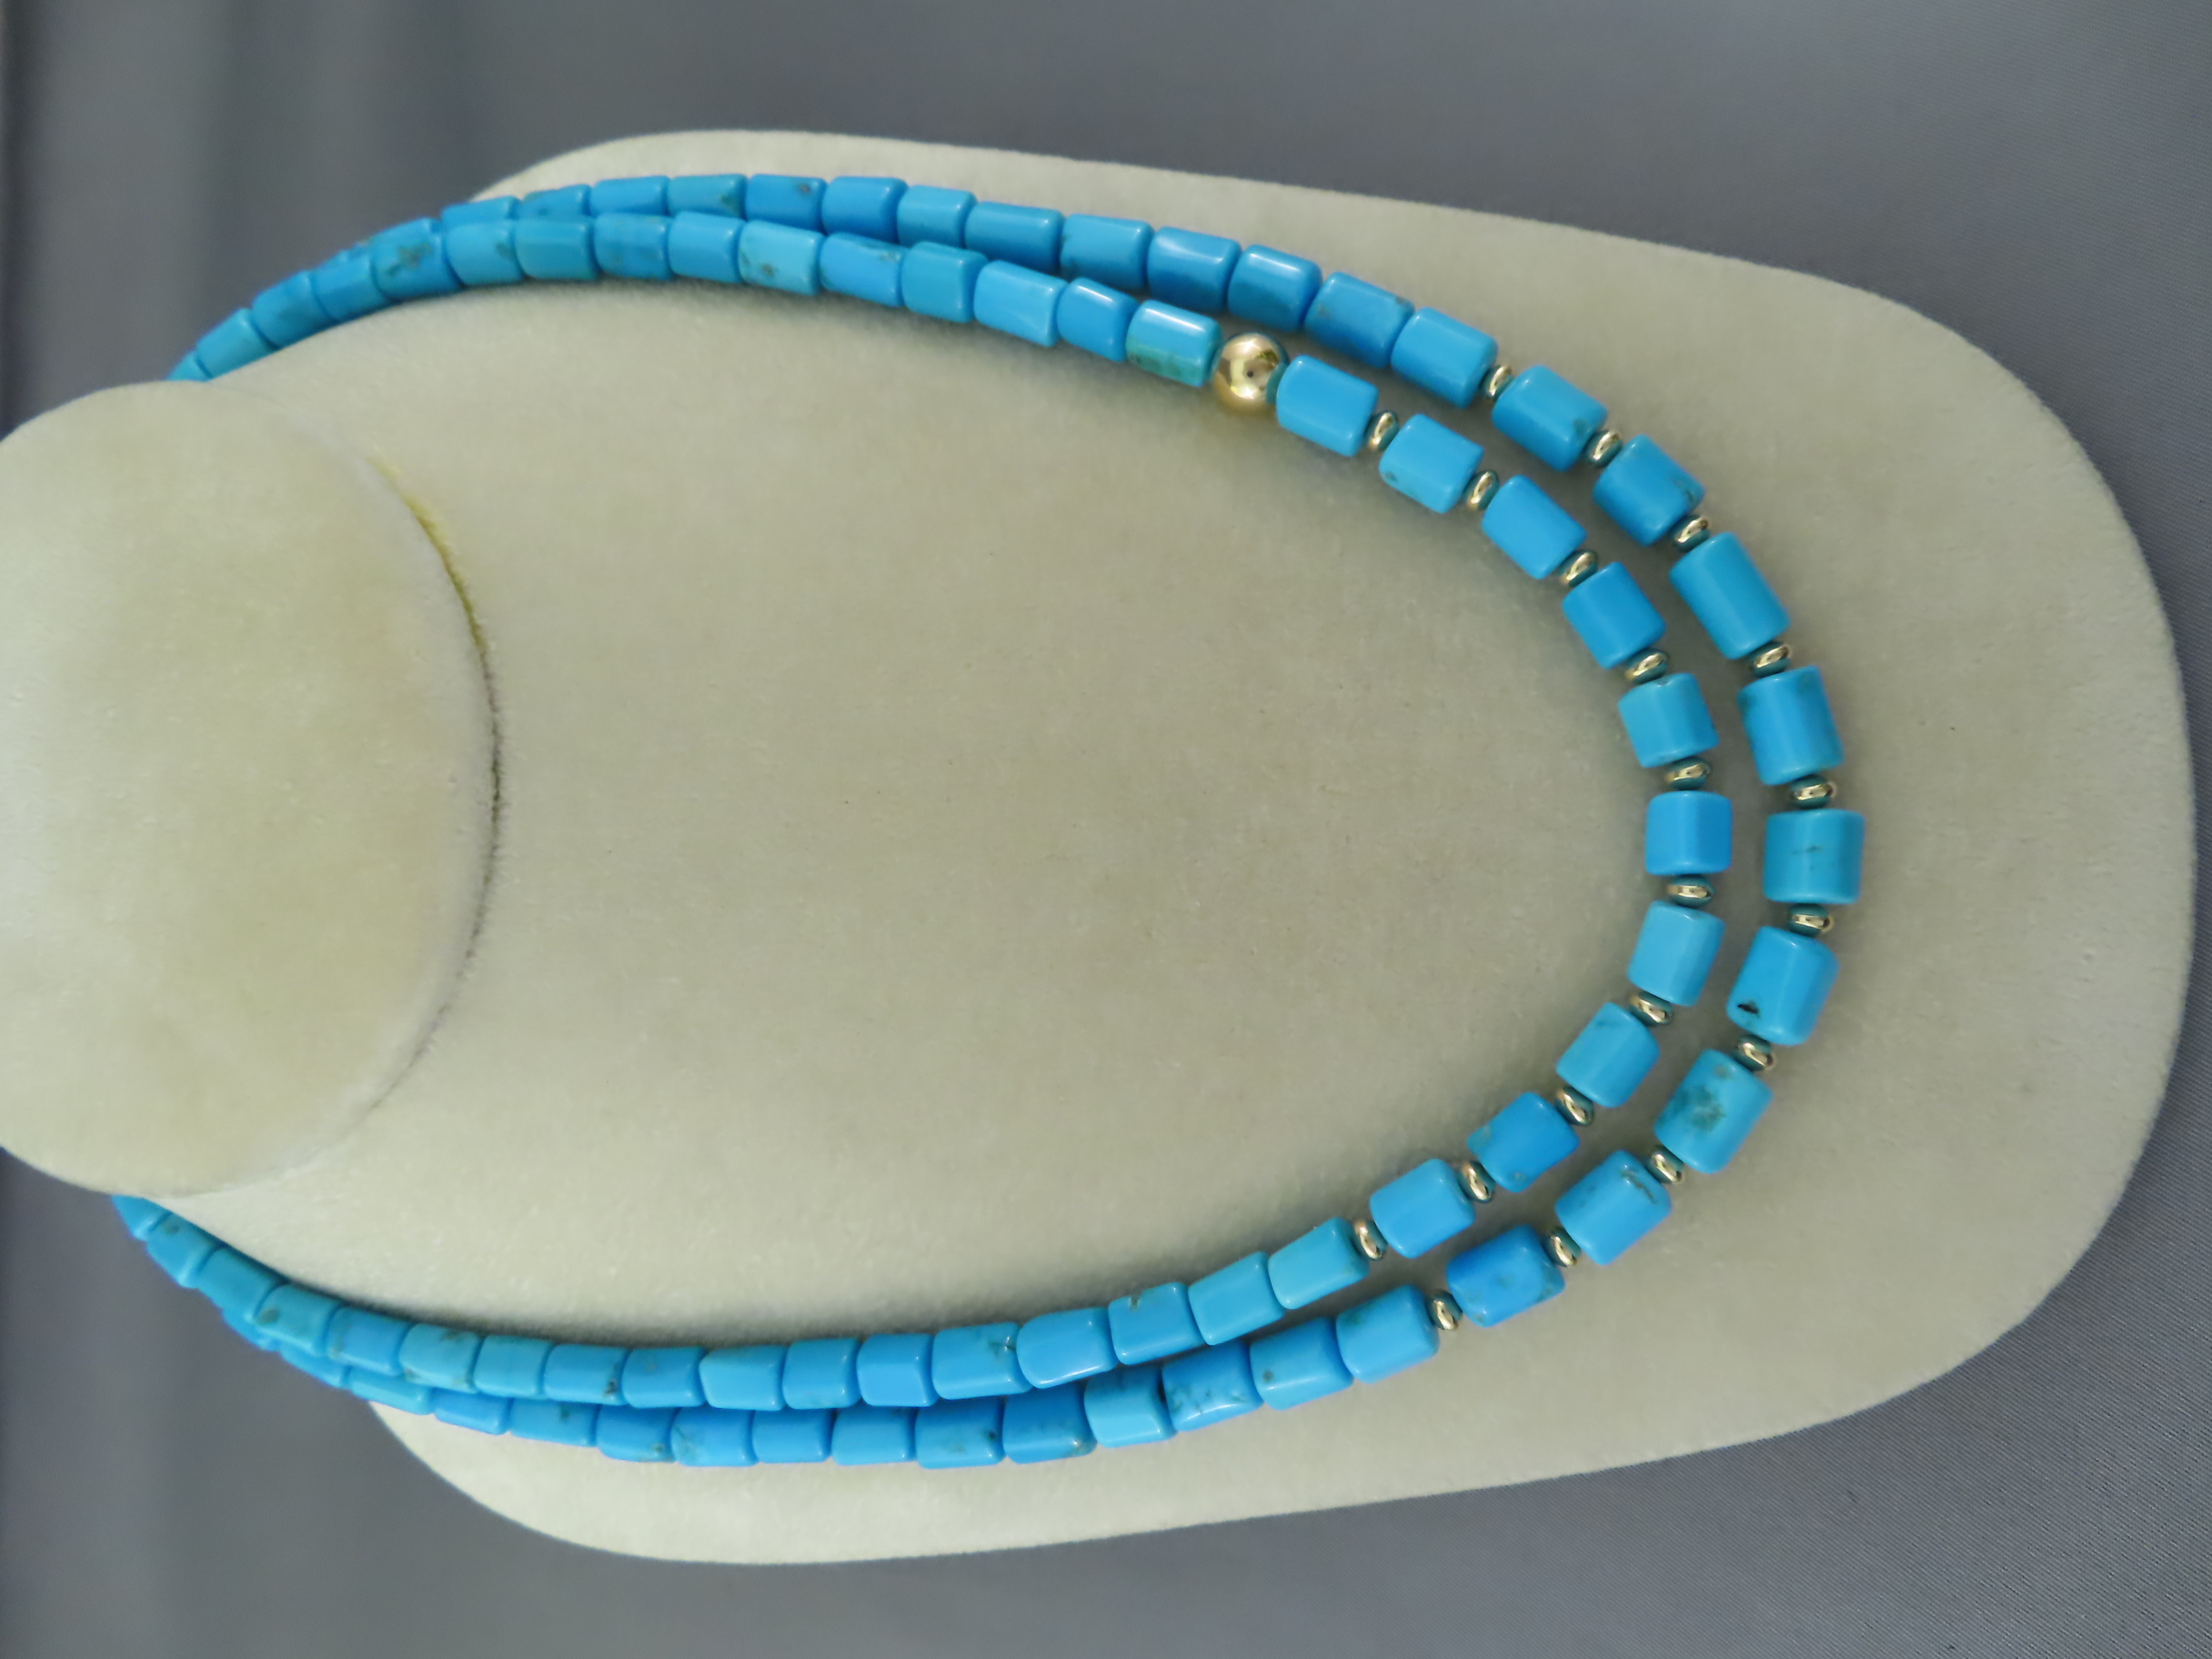 Double Strand Sleeping Beauty Turquoise Necklace with Gold